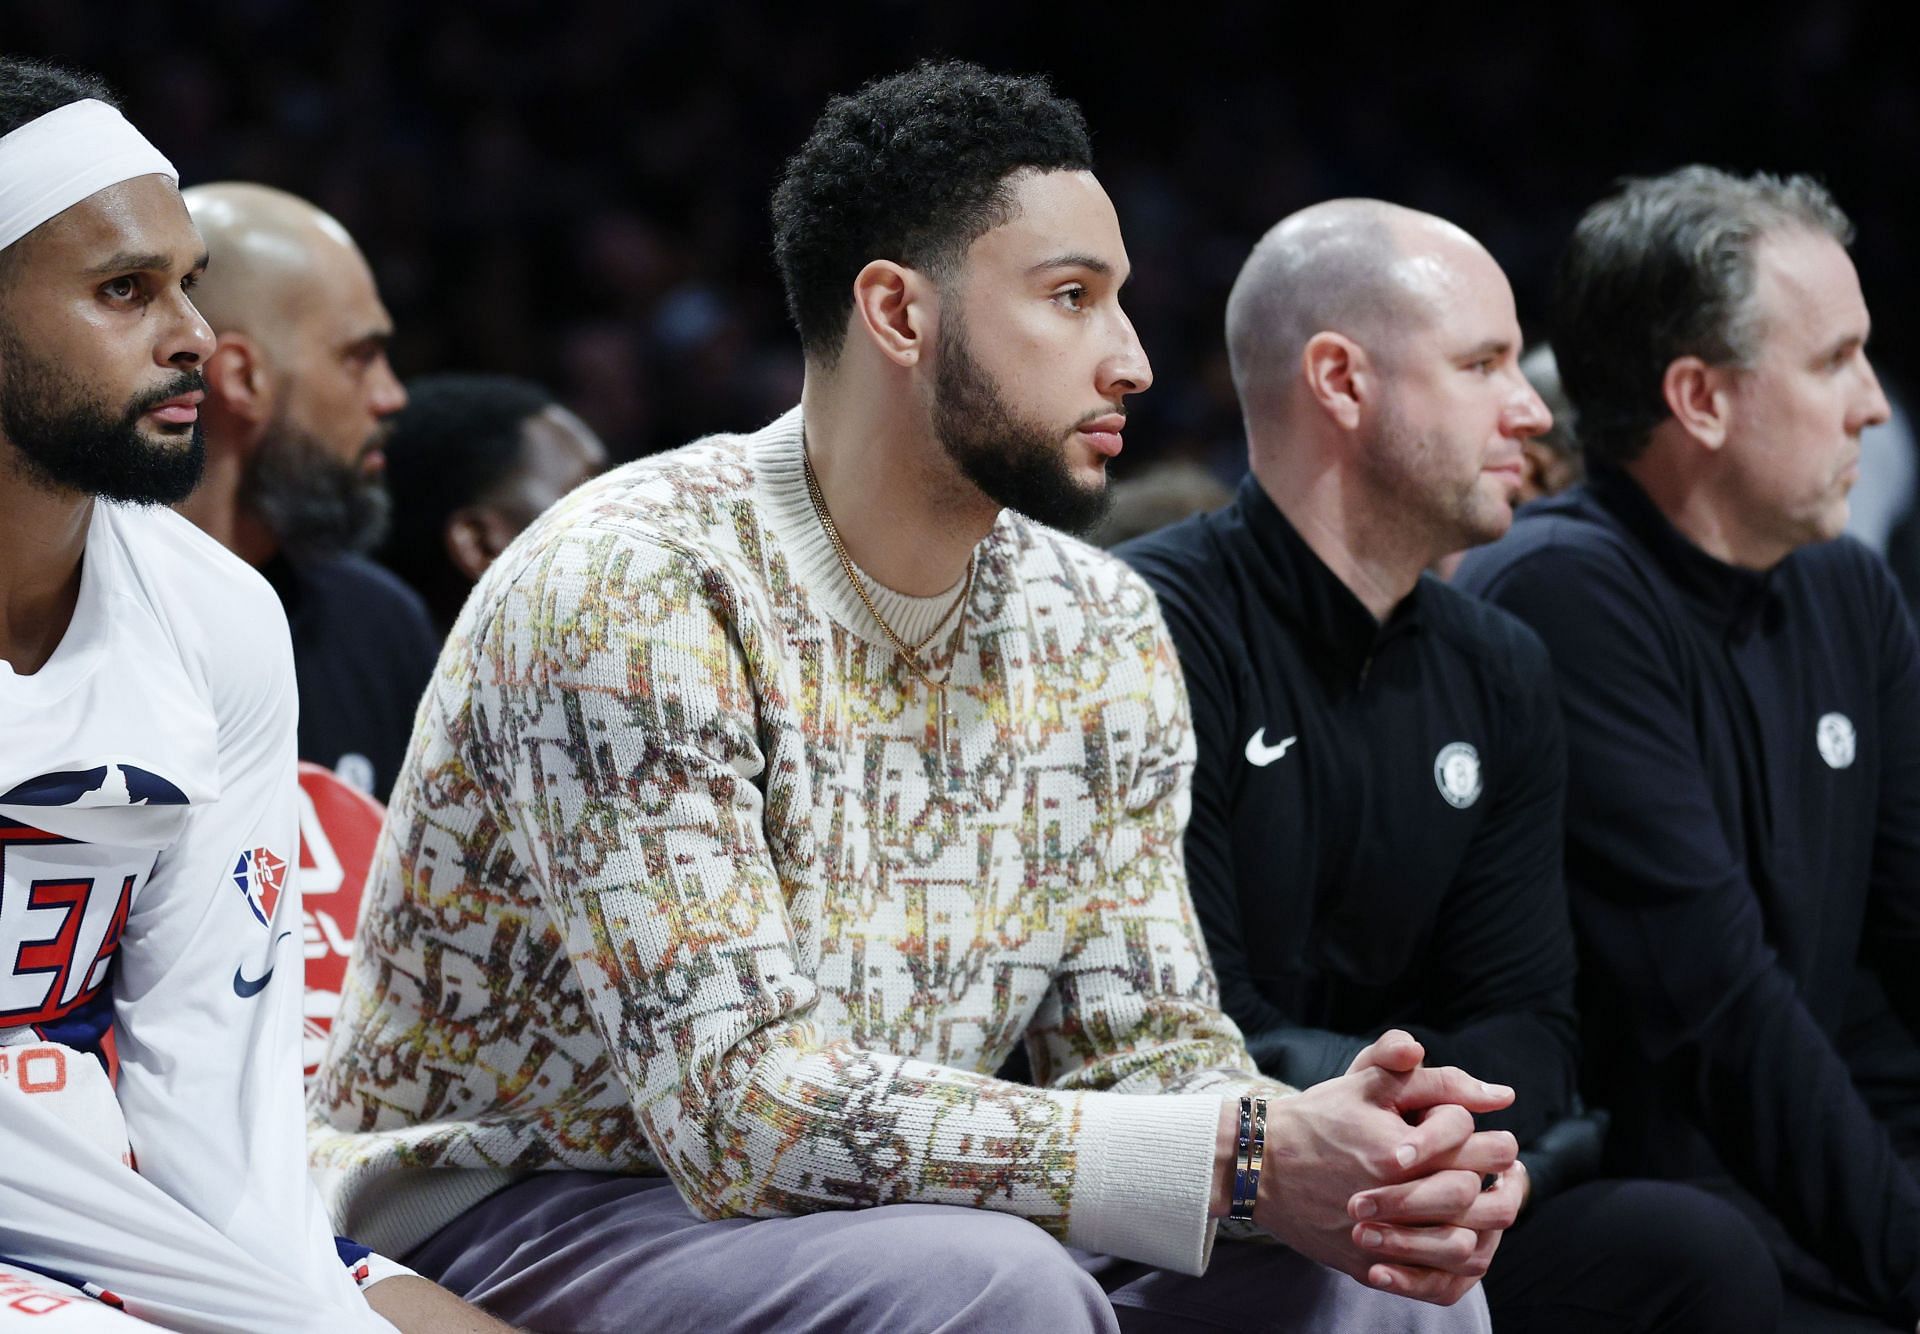 Ben Simmons is yet to suit up for the Nets his after blockbuster trade.